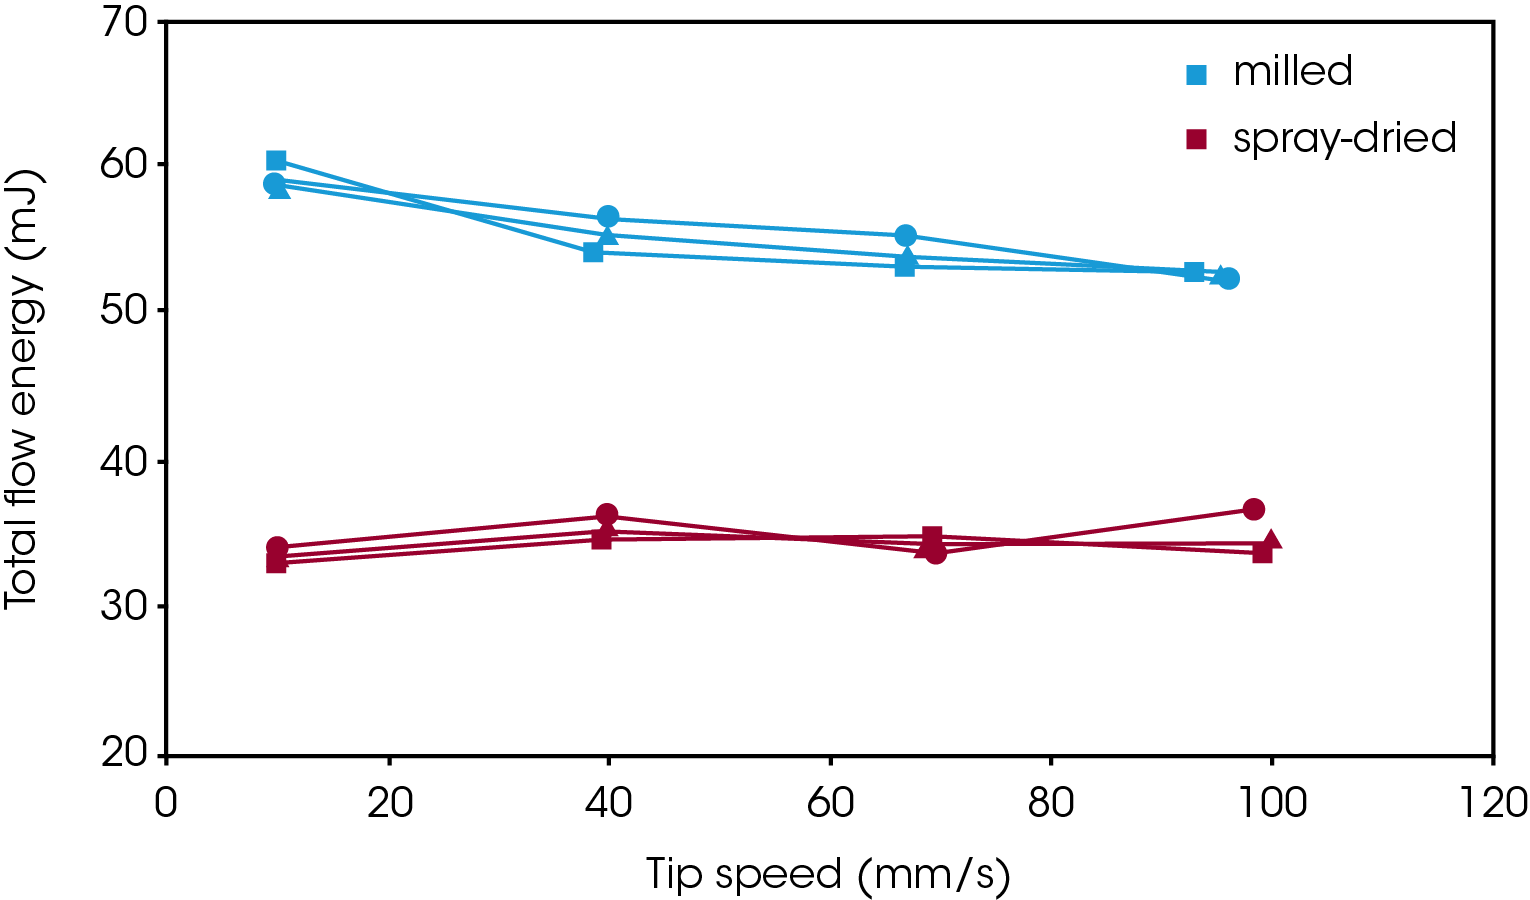 Figure 6. Flow energy with respect to testing speed for three samples each of milled (blue) and spray-dried (red) lactose. The milled lactose exhibits a rate dependency, requiring more energy at lower speeds.